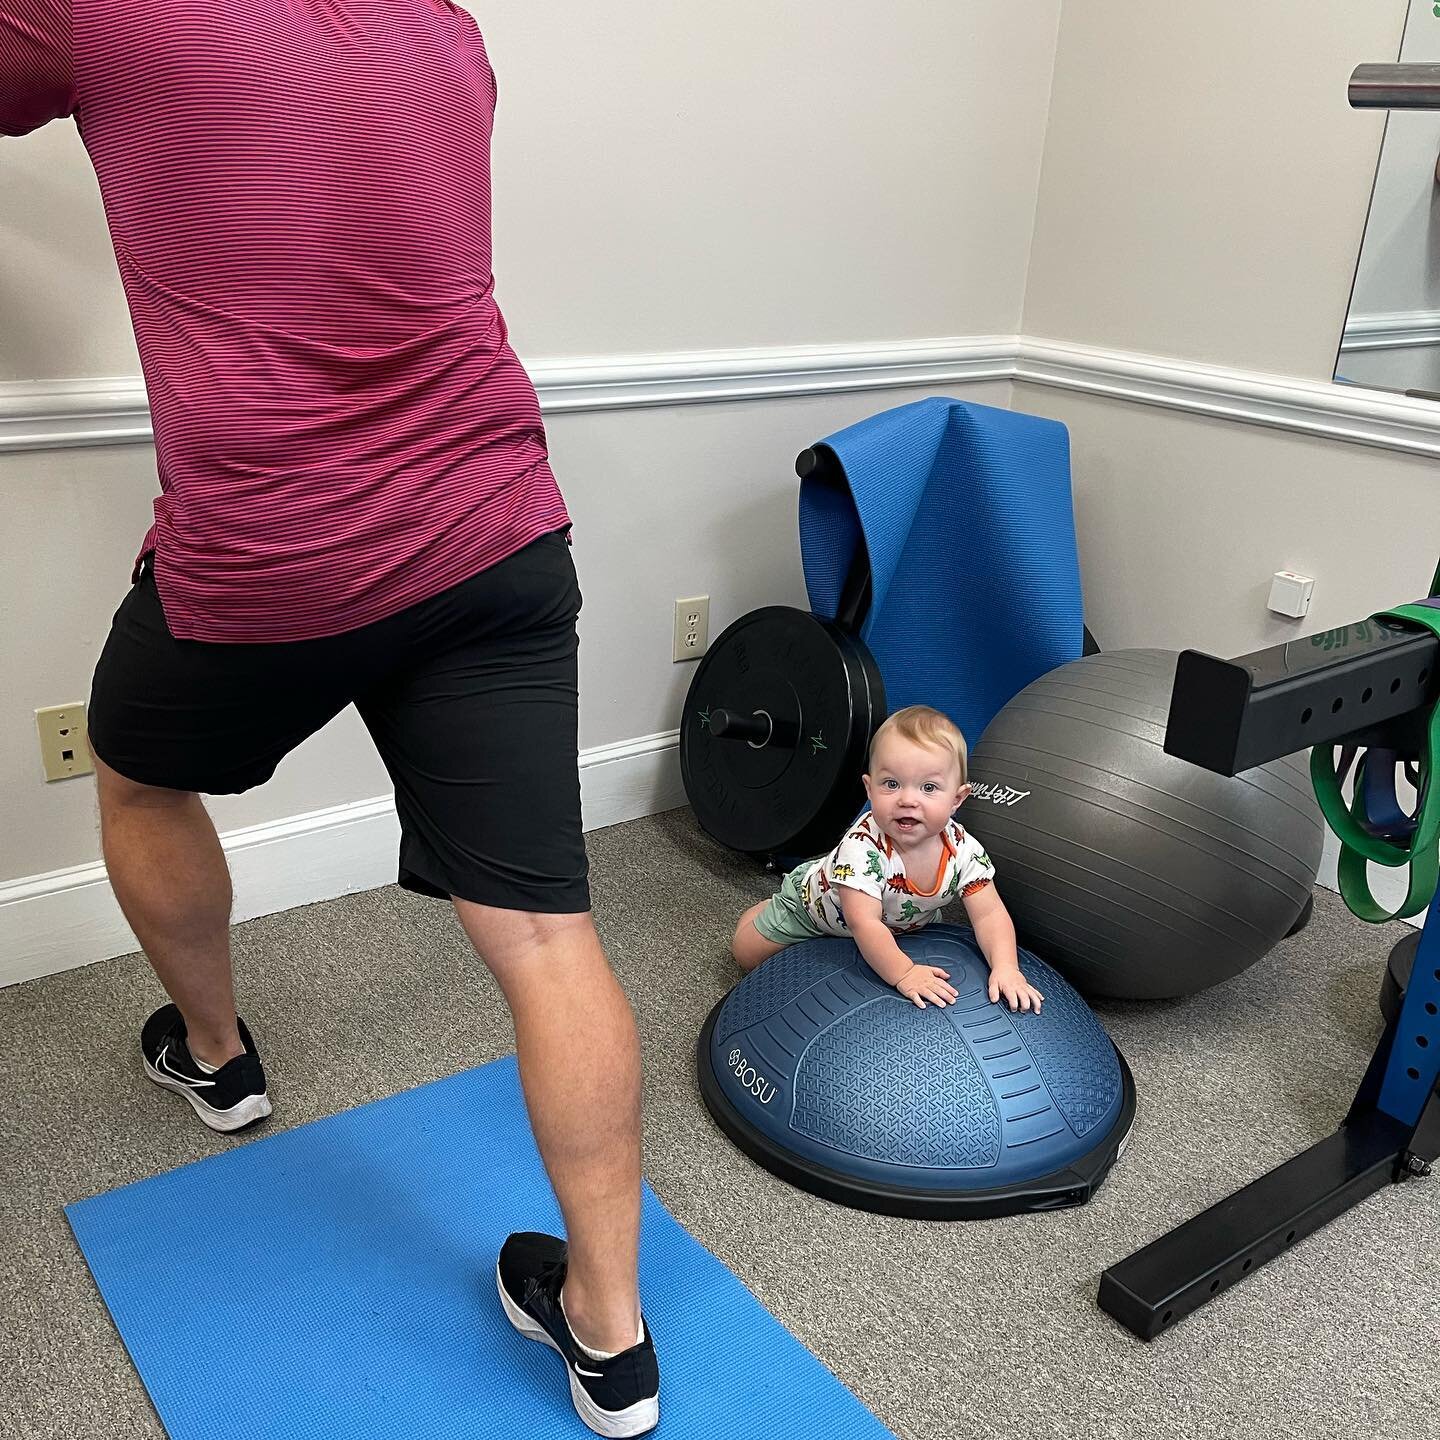 👶🏻 START THEM YOUNG &amp; SET THE EXAMPLE! 

We love to see our kids in the office‼️

#movementeveryday 

#movement

#chiropractic 

If your struggling with pain, injury or just curious, visit @movementspineandsport 

We provide active people sidel